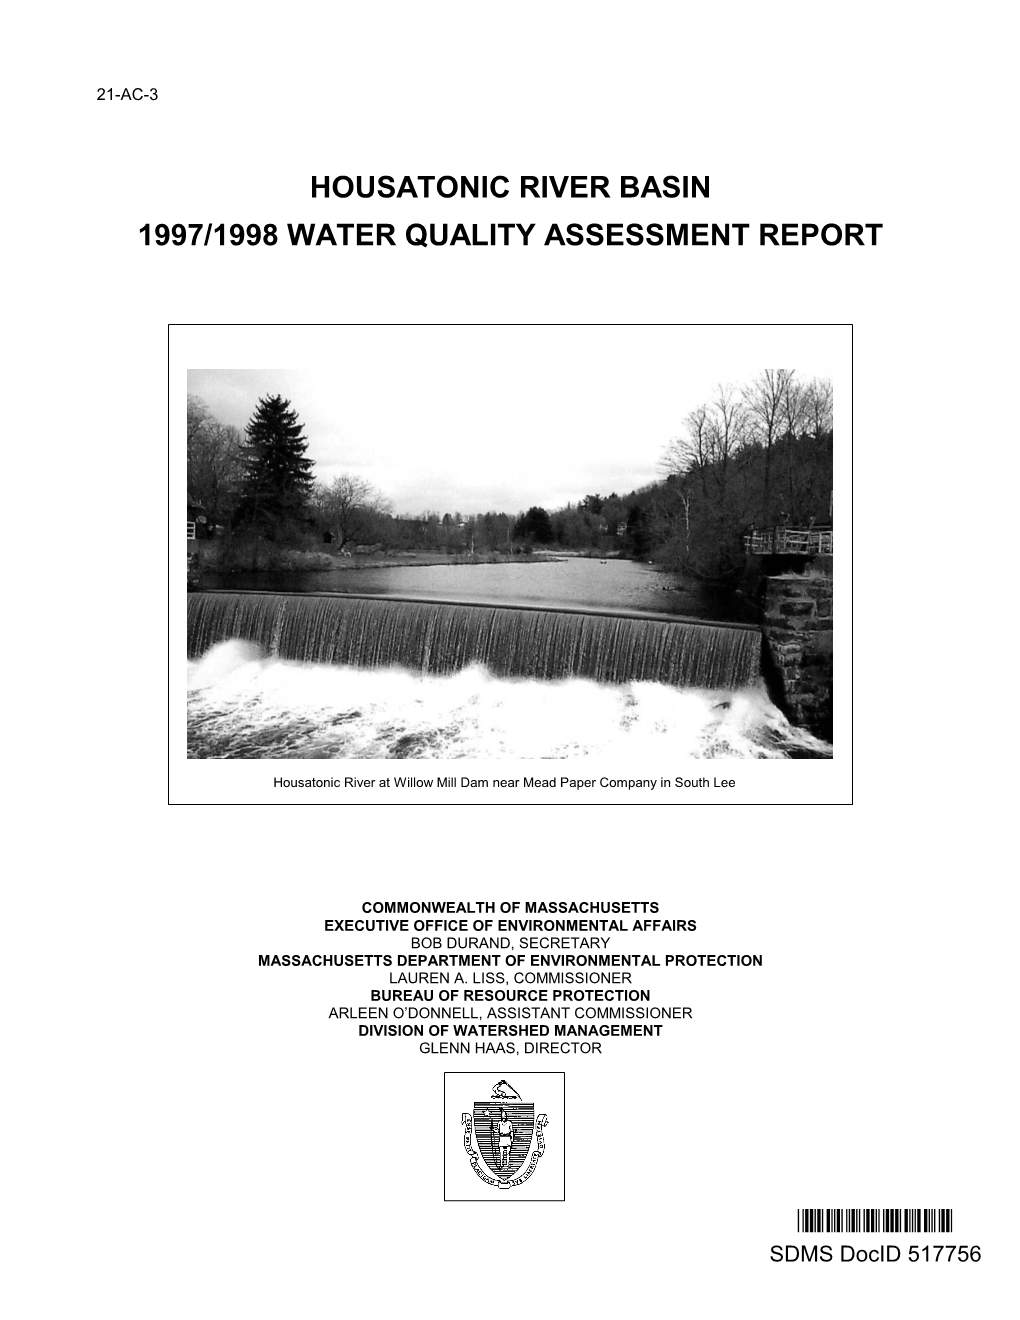 Housatonic River Basin 1997/1998 Water Quality Assessment Report